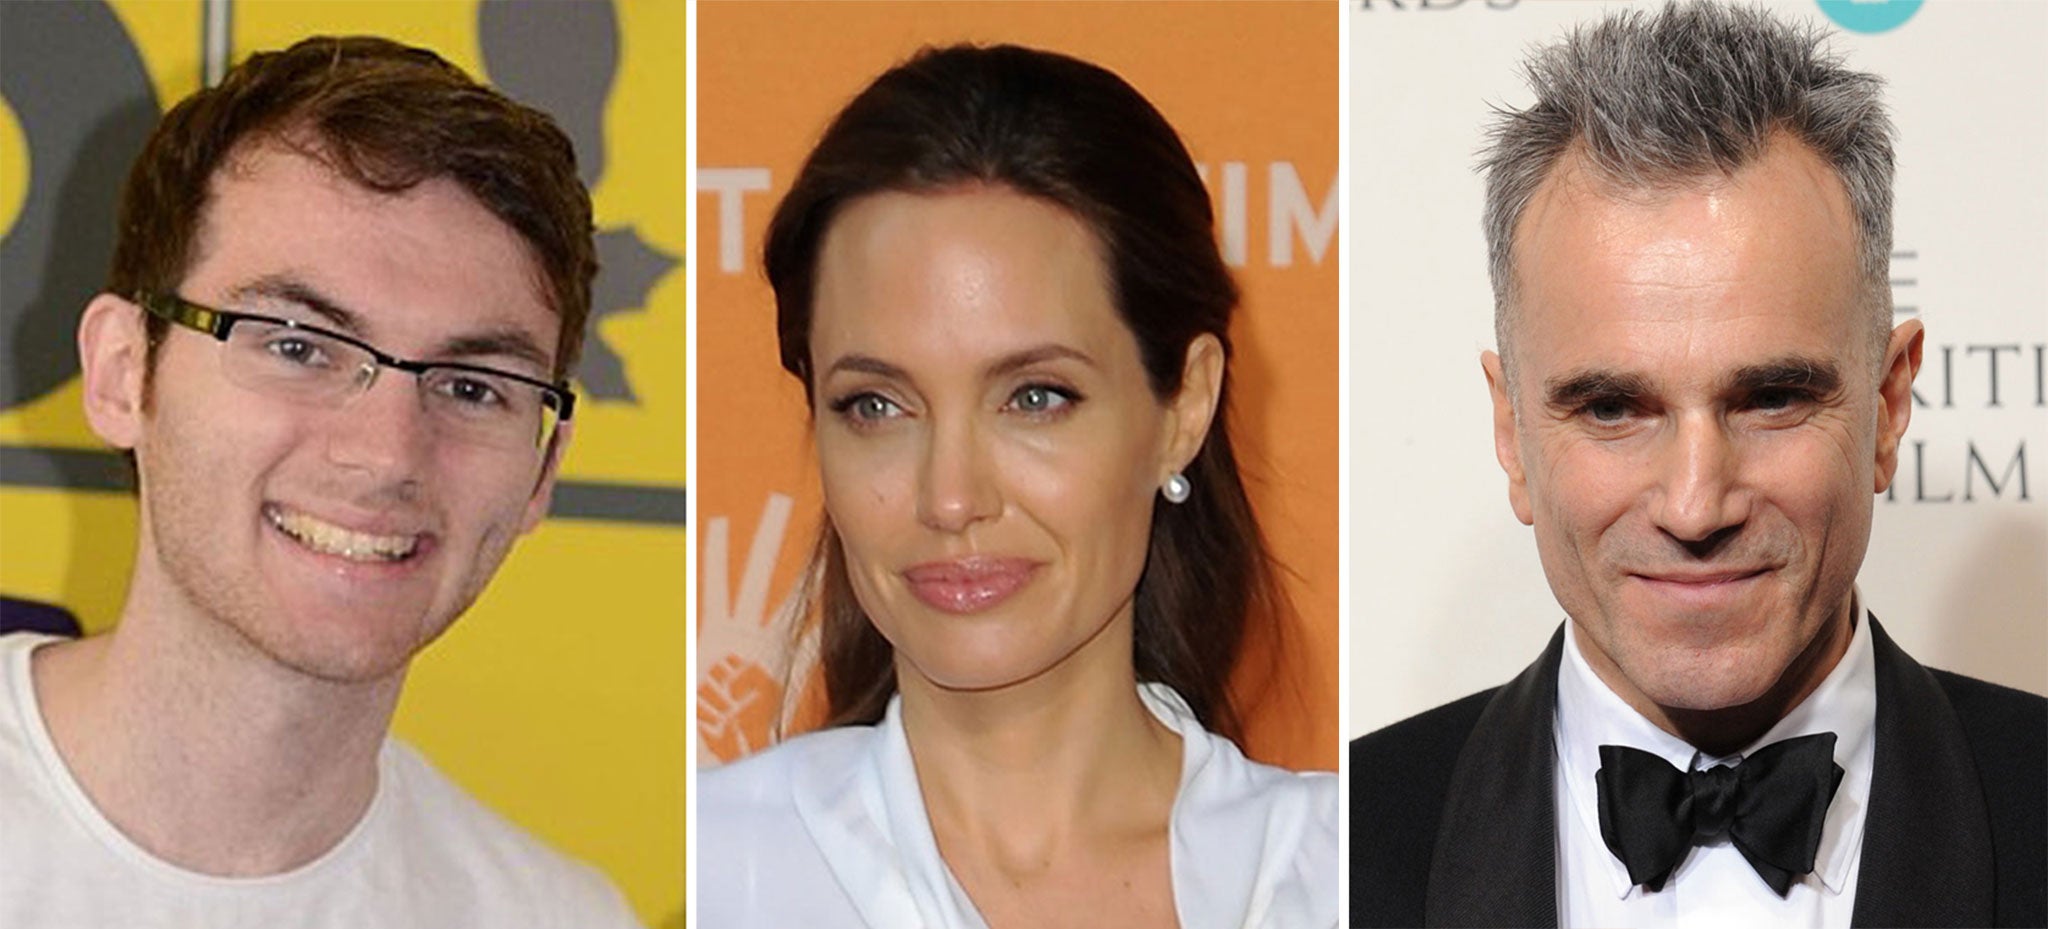 Stephen Sutton, Angelina Jolie and Daniel Day-Lewis have been recognised in the Queen's Birthday Honours 2014